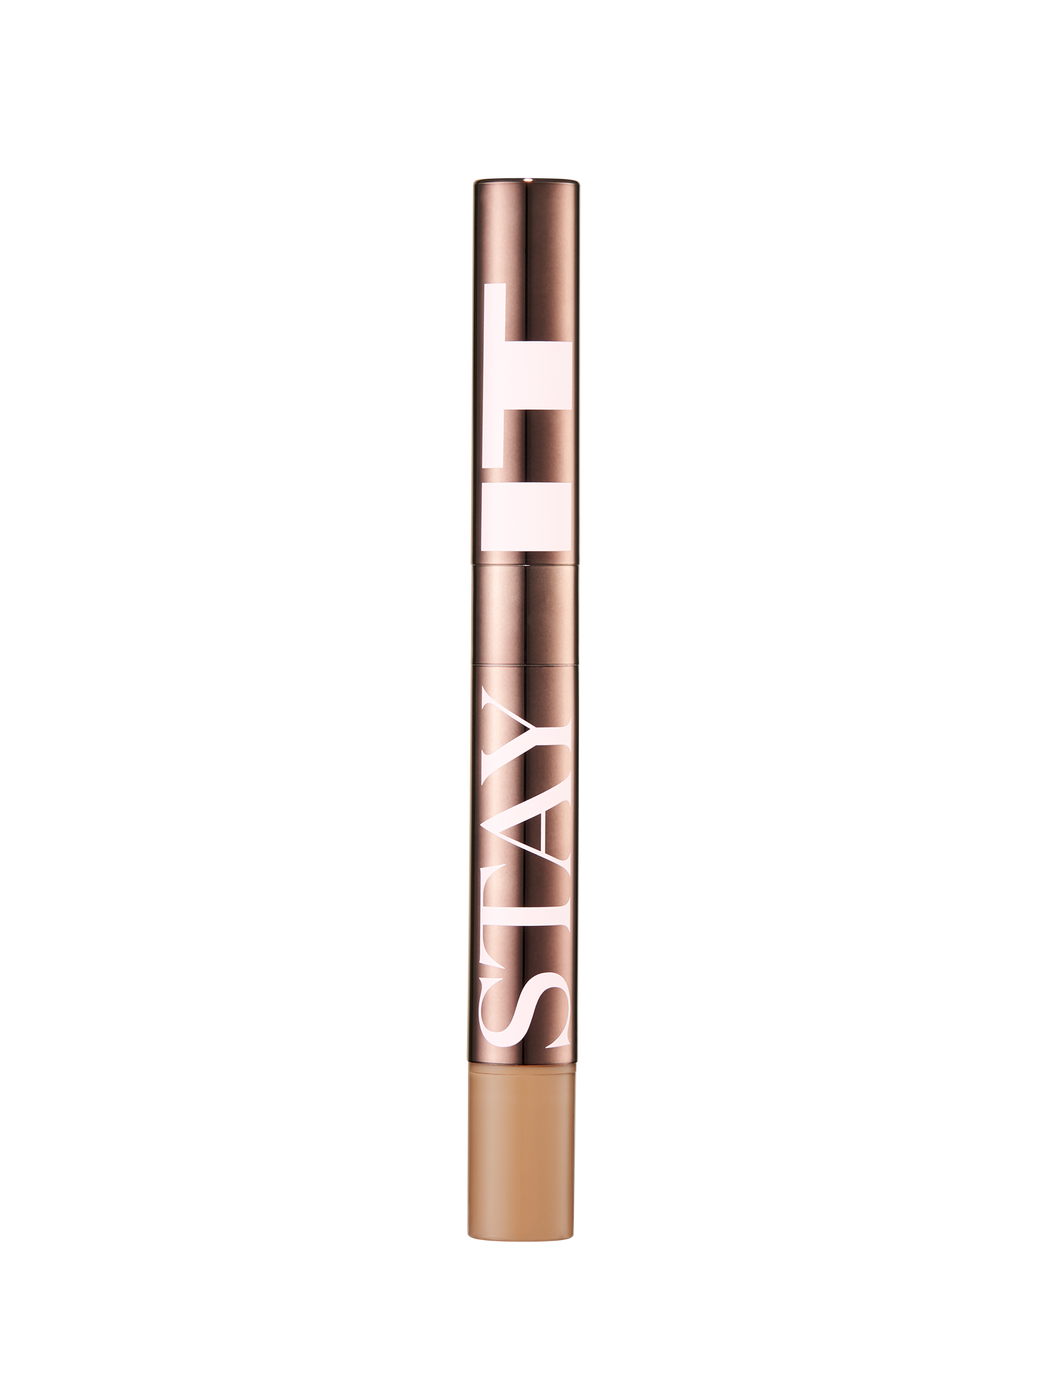 VT x BTS STAY IT EYEBROW 03 LIGHT BROWN - ONLY 15 LEFT!!!